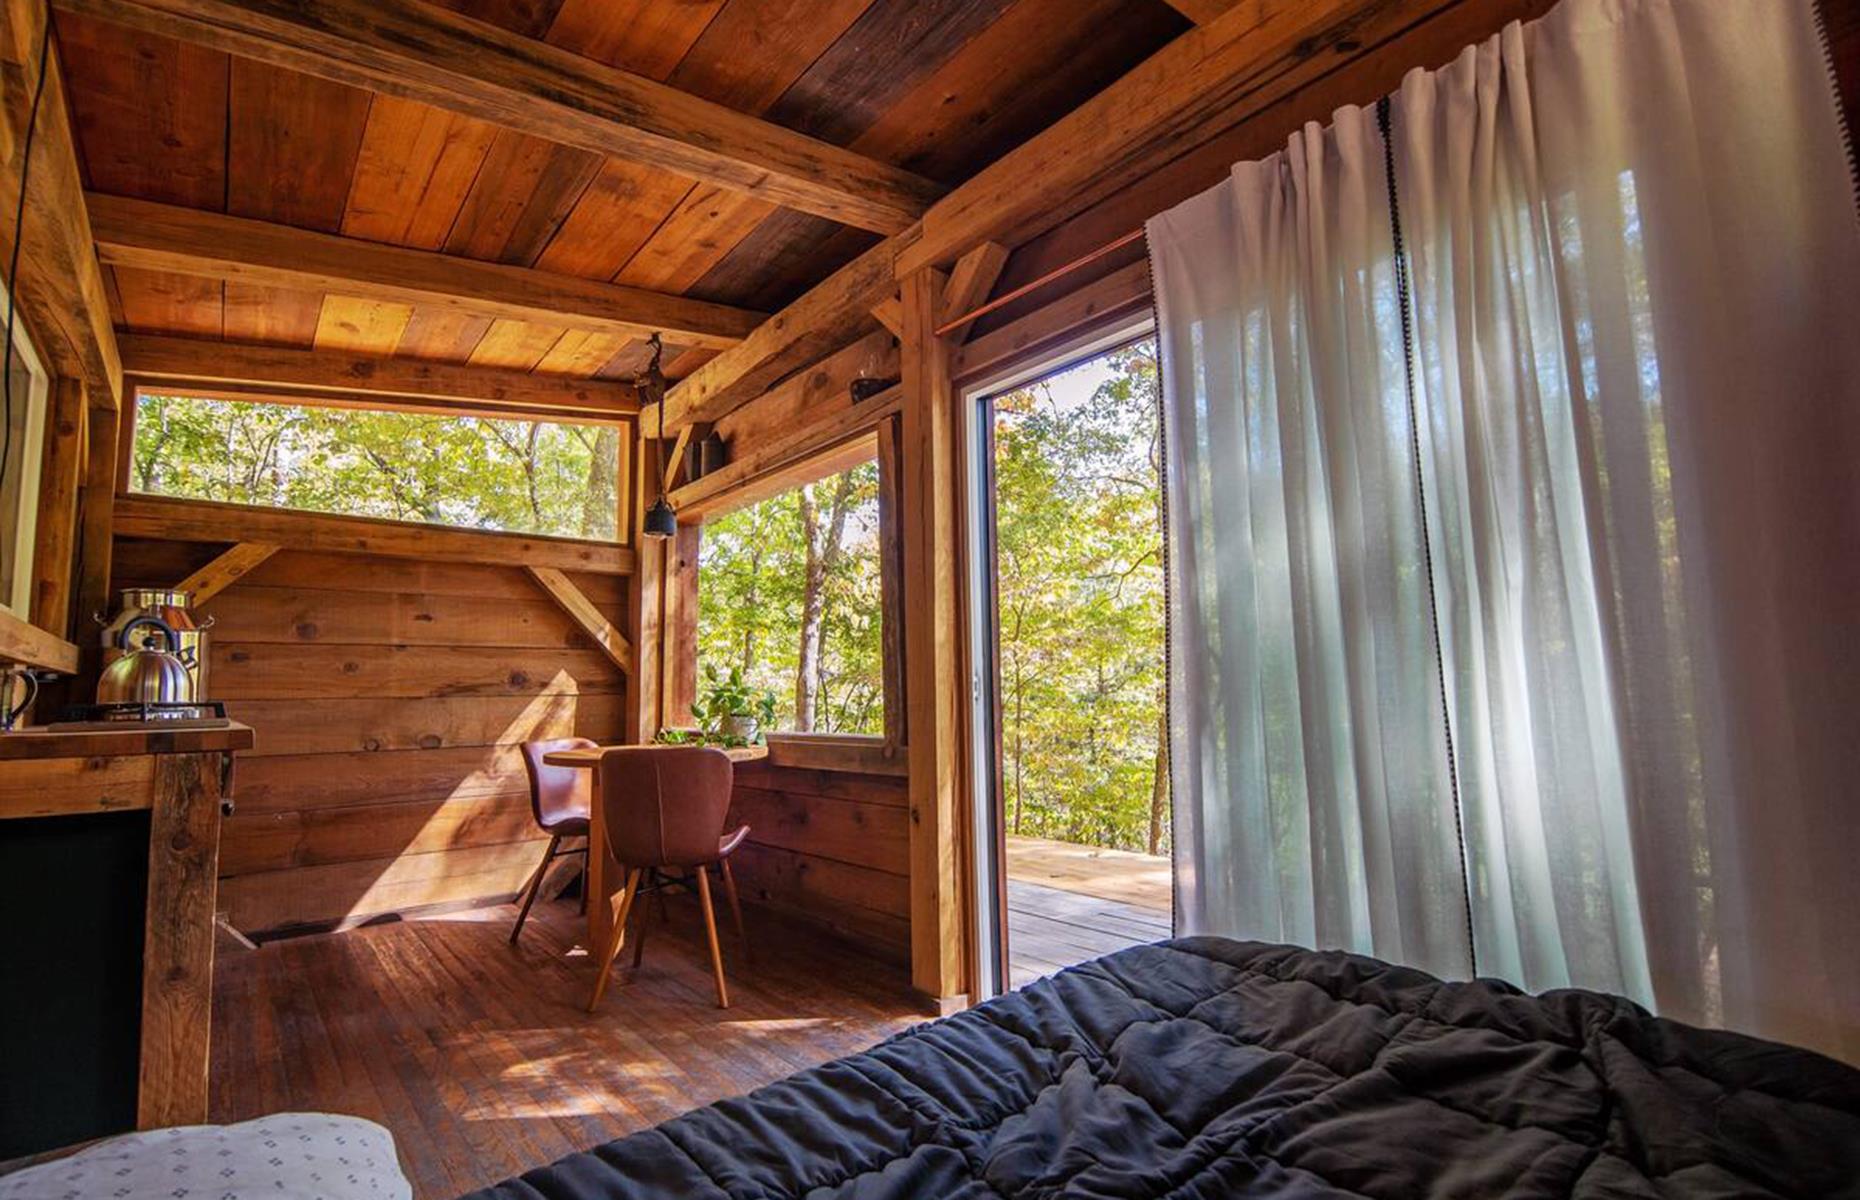 <p>Escape to the wilderness with <a href="https://www.airbnb.co.uk/rooms/584923908402382350?adults=2&check_in=2023-02-15&source_impression_id=p3_1671541021_UvSy2R9XpUG%2FOdyF&guests=1&check_out=2023-02-16">this rustic tiny home</a>, which was hand-built on the outskirts of Huntsville, a city known for its somber Civil War history. Ideal for nature lovers, the off-grid cabin is perched beside a spring-fed creek and surrounded by hiking and biking trails. It's powered by solar panels, with a propane cooktop, small fridge and basic cooking utensils, plus a bed surrounded by windows onto the wild. It'll set you back $99 per night. </p>